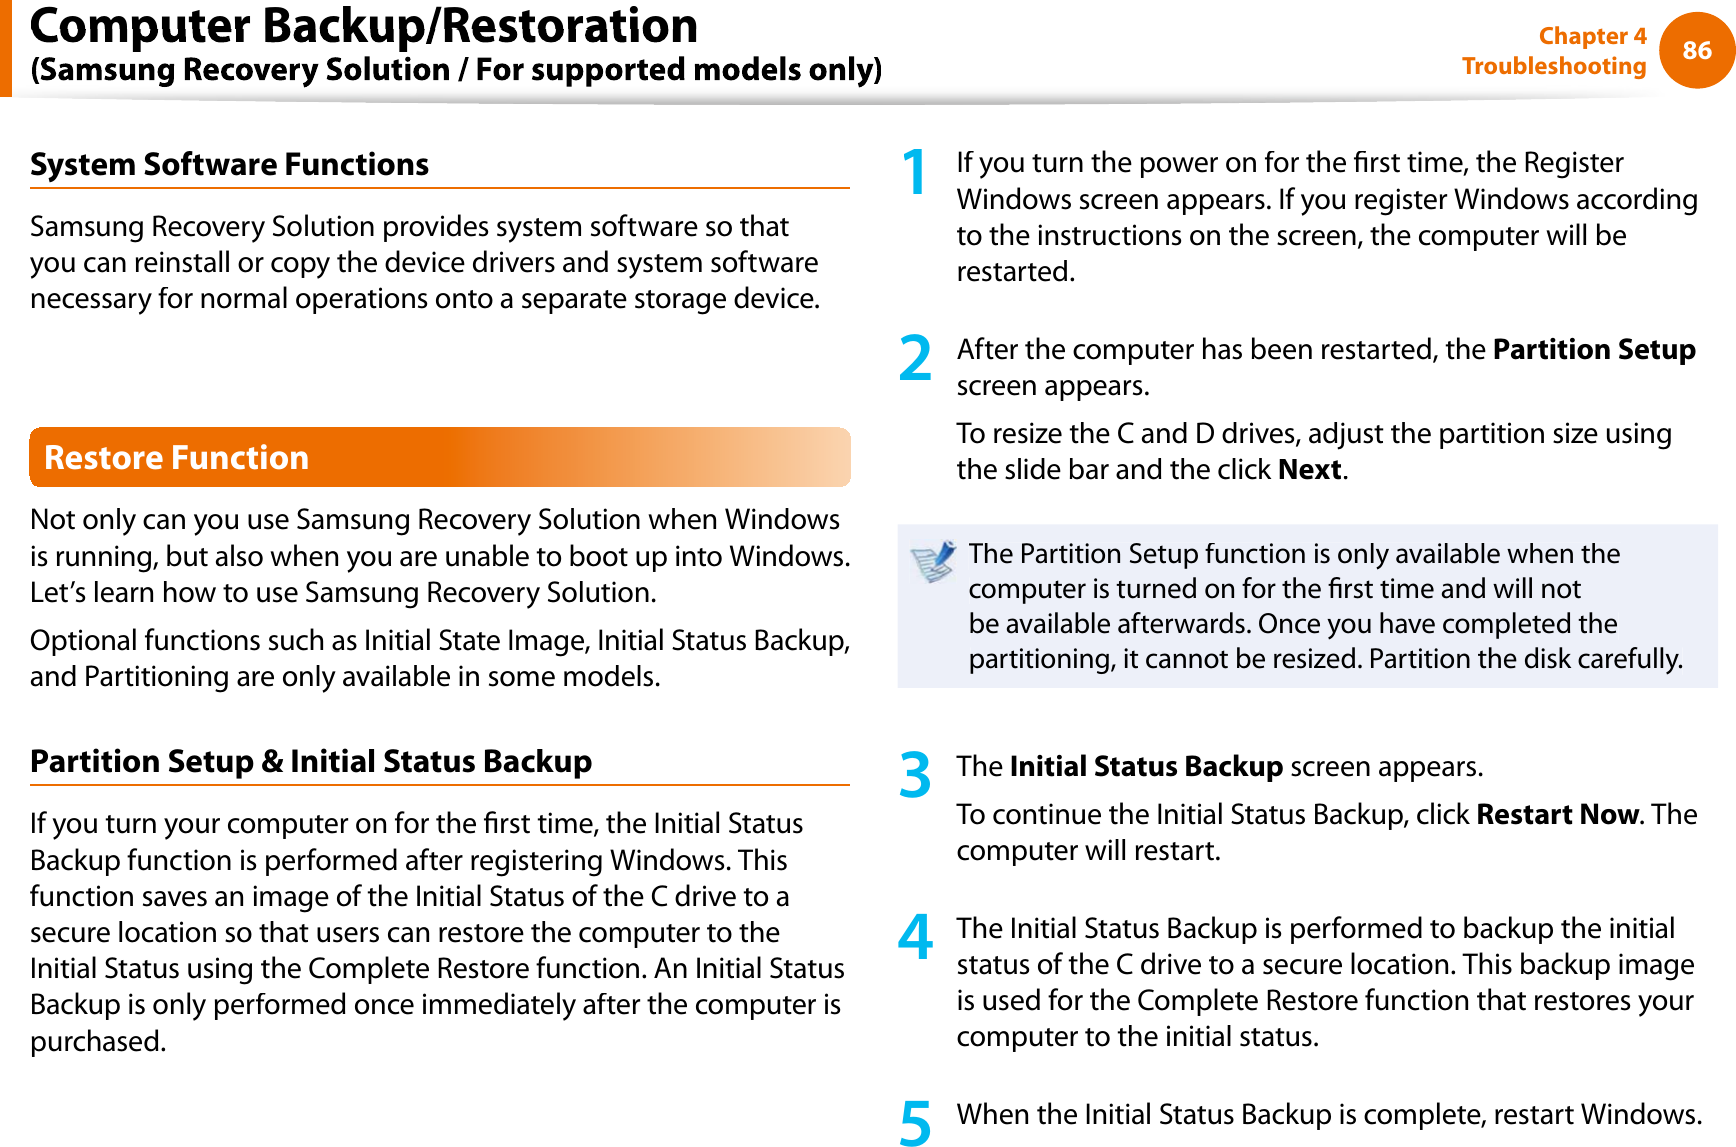 86Chapter 4TroubleshootingSystem Software FunctionsSamsung Recovery Solution provides system software so thatyou can reinstall or copy the device drivers and system softwarenecessary for normal operations onto a separate storage device.Restore FunctionNot only can you use Samsung Recovery Solution when Windowsis running, but also when you are unable to boot up into Windows.Let’s learn how to use Samsung Recovery Solution.Optional functions such as Initial State Image, Initial Status Backup,and Partitioning are only available in some models.Partition Setup &amp; Initial Status BackupIf you turn your computer on for the rst time, the Initial StatusBackup function is performed after registering Windows. Thisfunction saves an image of the Initial Status of the C drive to asecure location so that users can restore the computer to theInitial Status using the Complete Restore function. An Initial StatusBackup is only performed once immediately after the computer ispurchased.1If you turn the power on for the rst time, the RegisterWindows screen appears. If you register Windows accordingto the instructions on the screen, the computer will berestarted.2After the computer has been restarted, thePartition Setupscreen appears.To resize the C and D drives, adjust the partition size usingthe slide bar and the click Next.The Partition Setup function is only available when thecomputer is turned on for the rst time and will notbe available afterwards. Once you have completed thepartitioning, it cannot be resized. Partition the disk carefully.3TheInitial Status Backup screen appears.To continue the Initial Status Backup, click Restart Now. Thecomputer will restart.4The Initial Status Backup is performed to backup the initialstatus of the C drive to a secure location. This backup imageis used for the Complete Restore function that restores yourcomputer to the initial status.5When the Initial Status Backup is complete, restart Windows.Computer Backup/Restoration